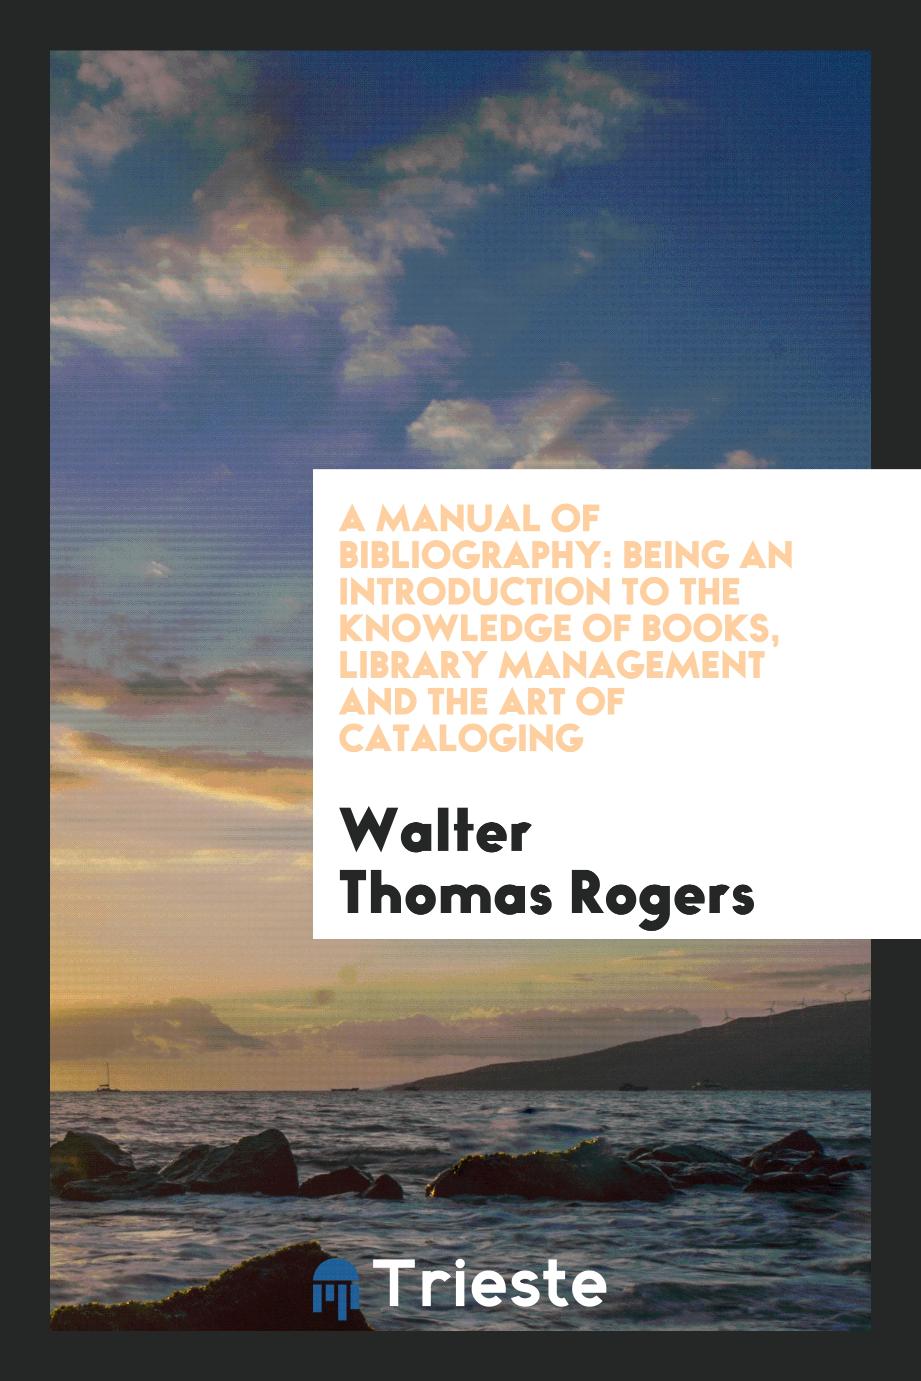 A Manual of Bibliography: Being an Introduction to the Knowledge of Books, Library Management and the Art of Cataloging